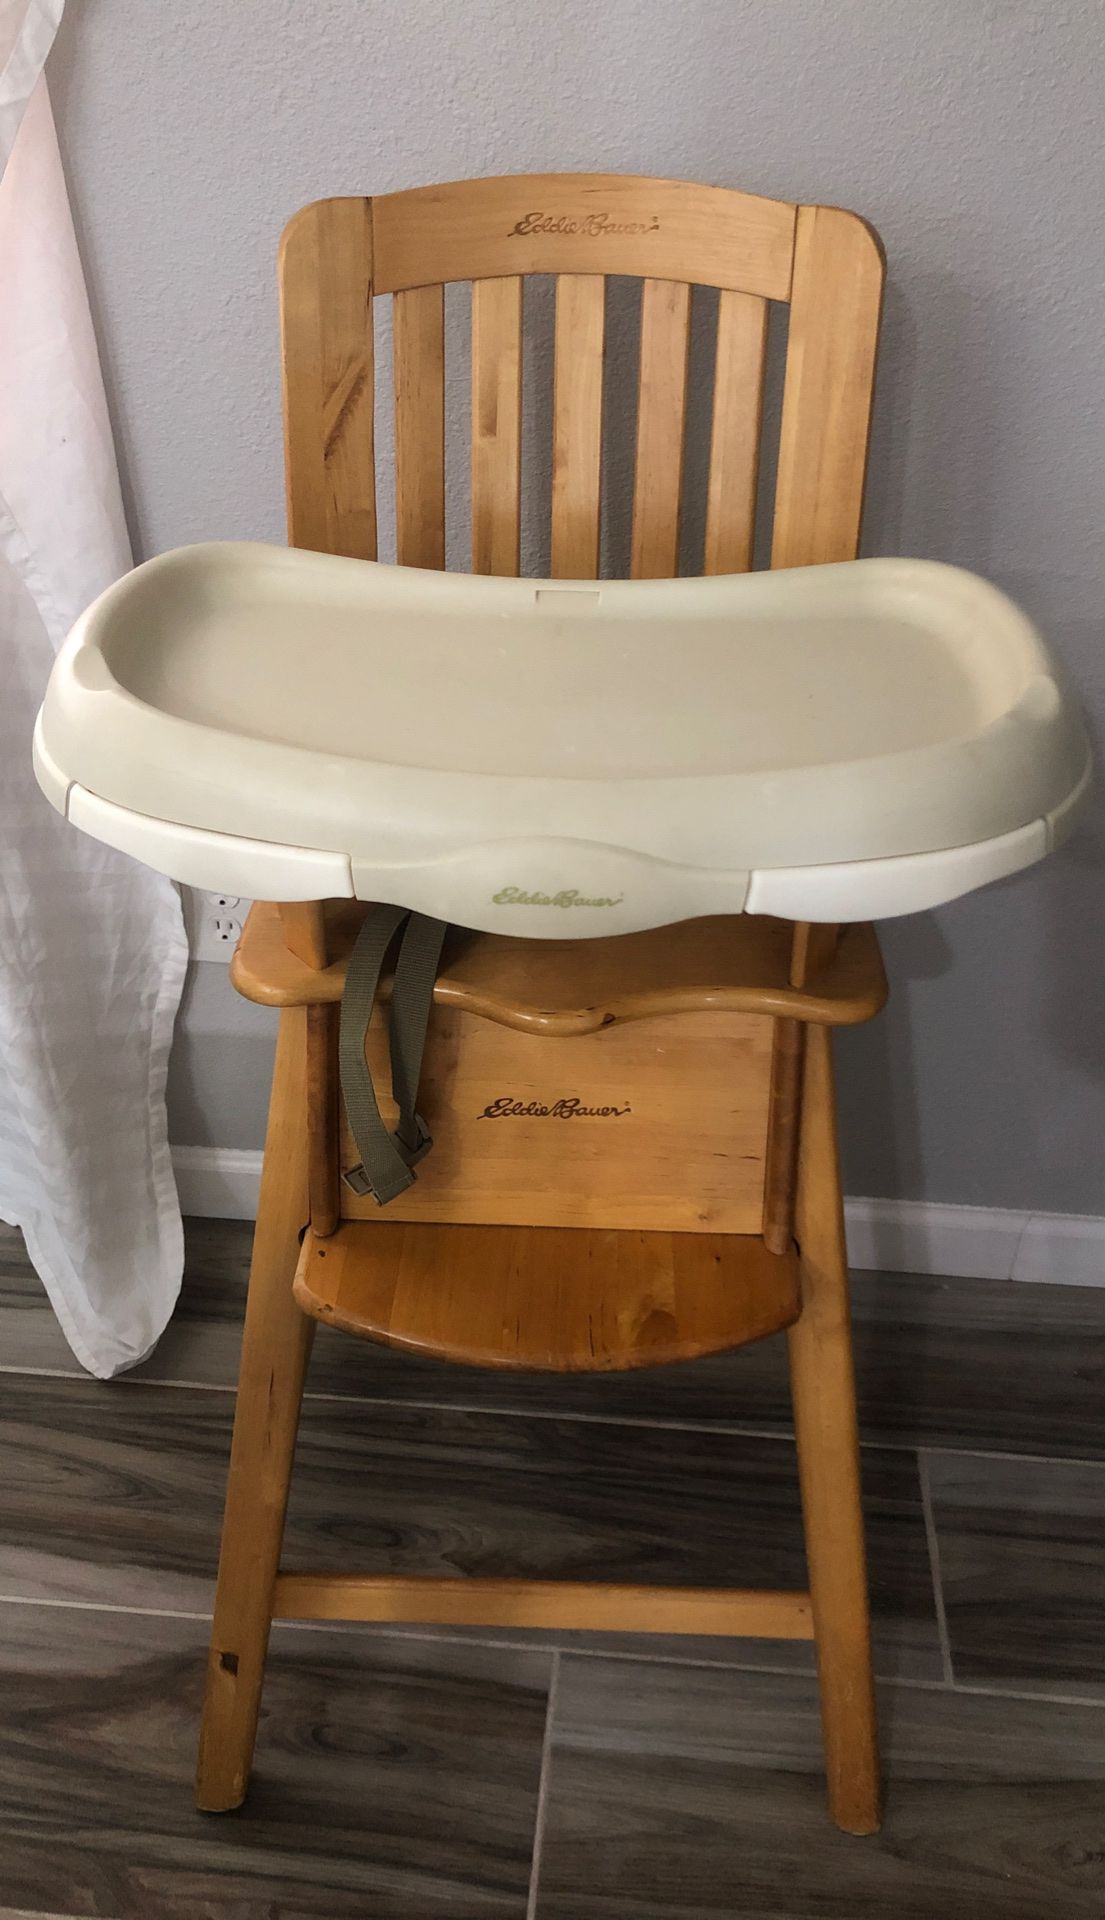 Eddie Bauer Baby Kids Toddlers High Chair and Tray - GREAT CONDITION